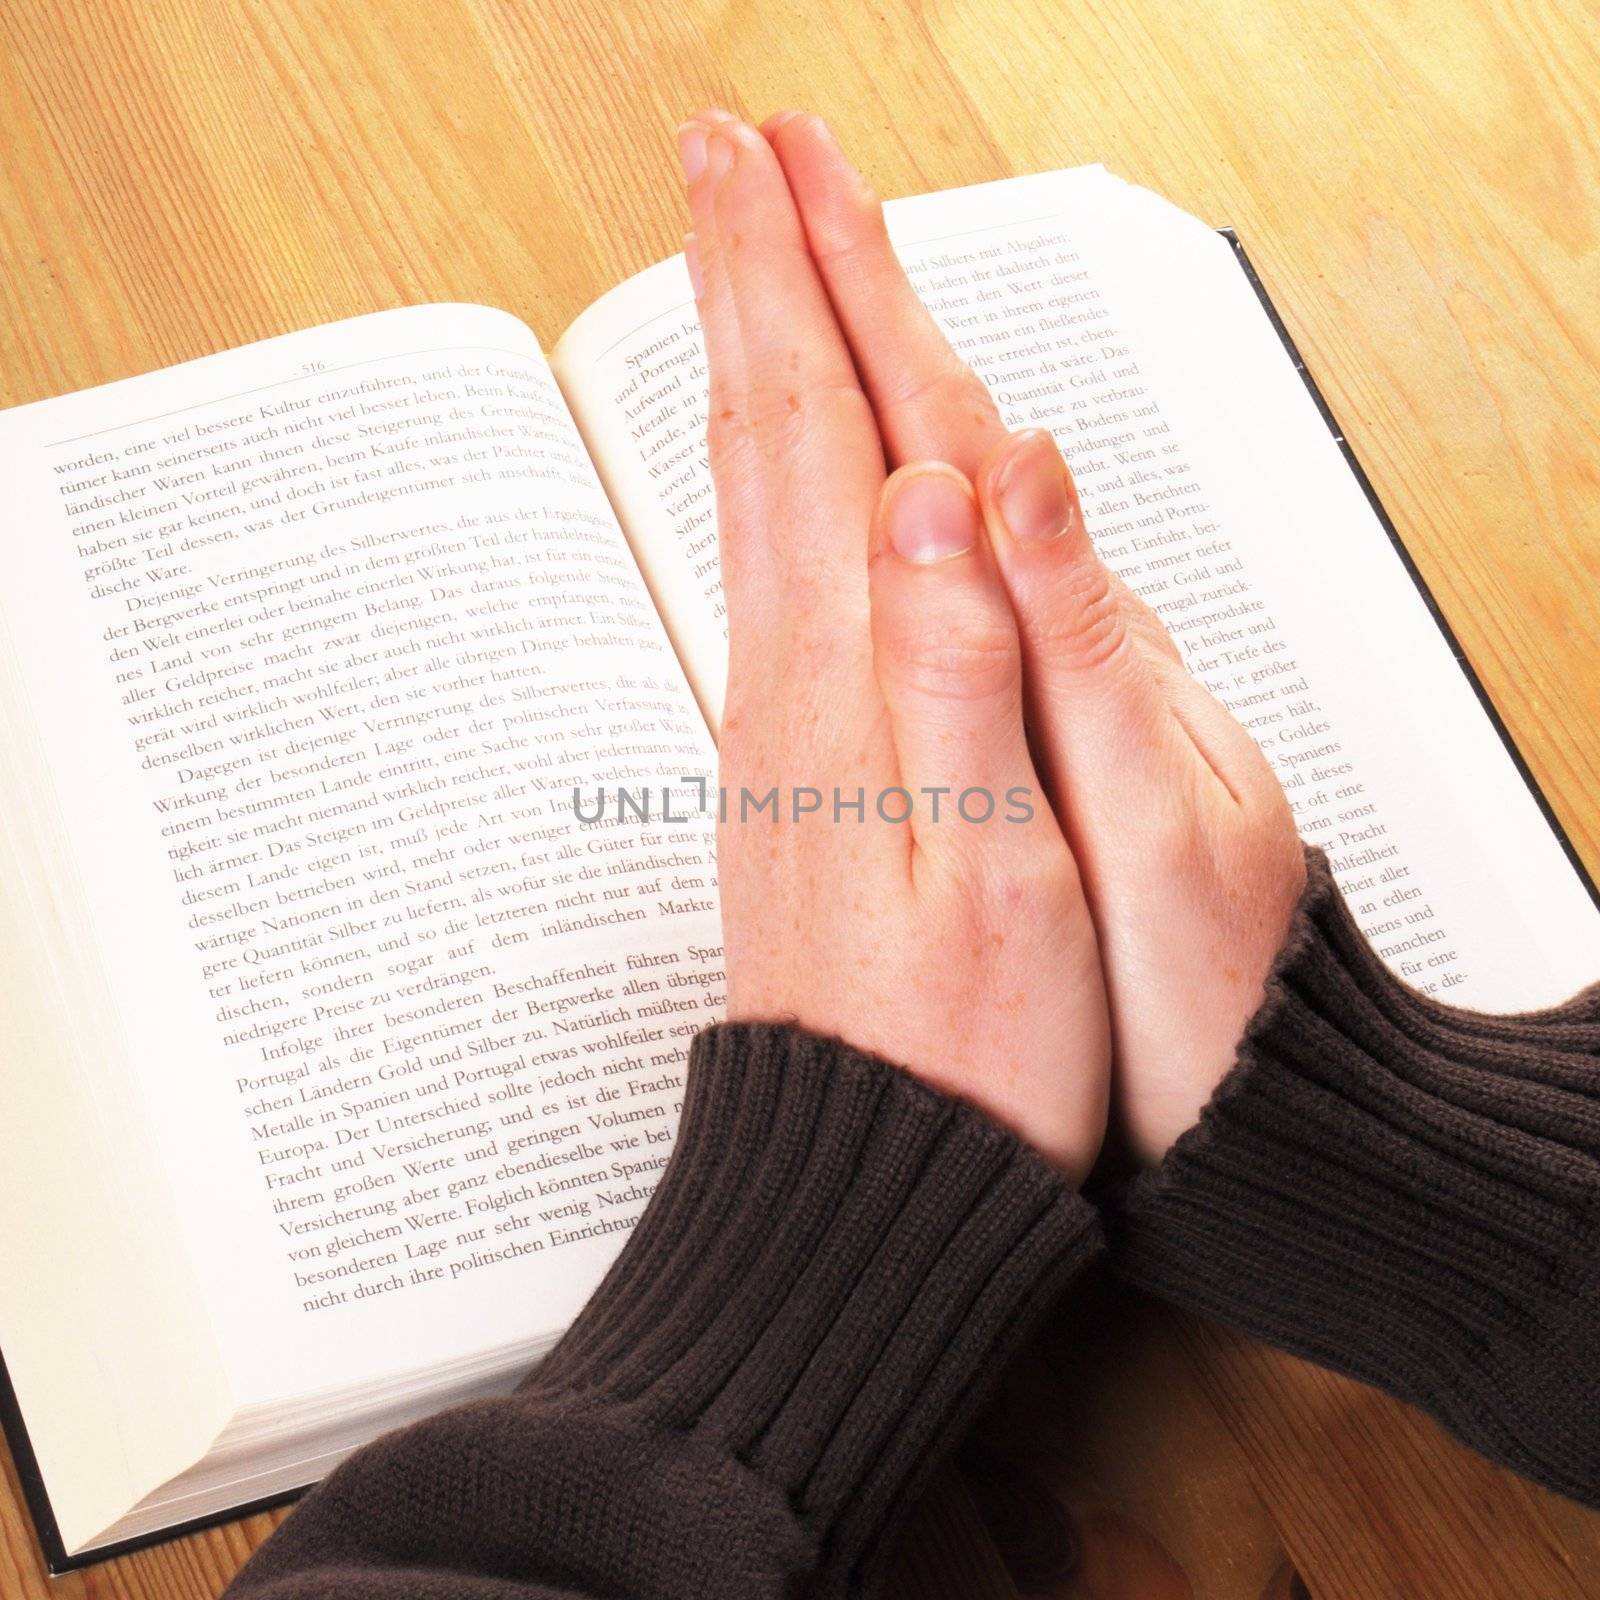 praying hand and book on desk showing religion concept